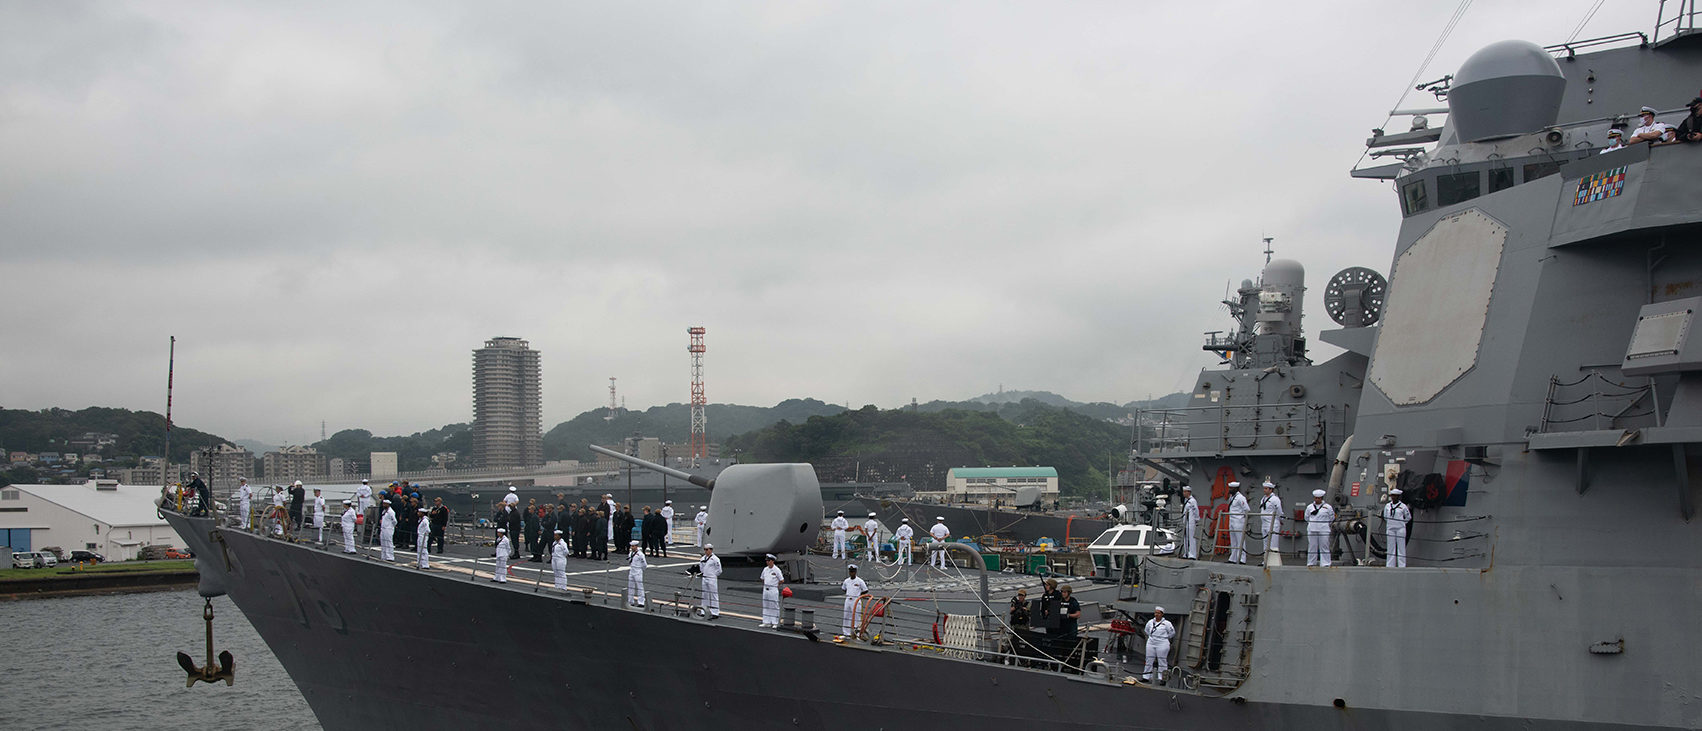 YOKOSUKA, Japan (Aug. 16, 2021) The Arleigh Burke-class guided-missile destroyer USS Higgins (DDG 76) arrives at Commander, Fleet Activities Yokosuka (CFAY), Japan Aug. 16 as one of the newest additions to Commander, Task Force (CTF) 71/Destroyer Squadron (DESRON) 15. Higgins is assigned to CTF 71/DESRON 15, the Navy’s largest forward deployed DESRON and the U.S. 7th Fleet’s principle surface force.